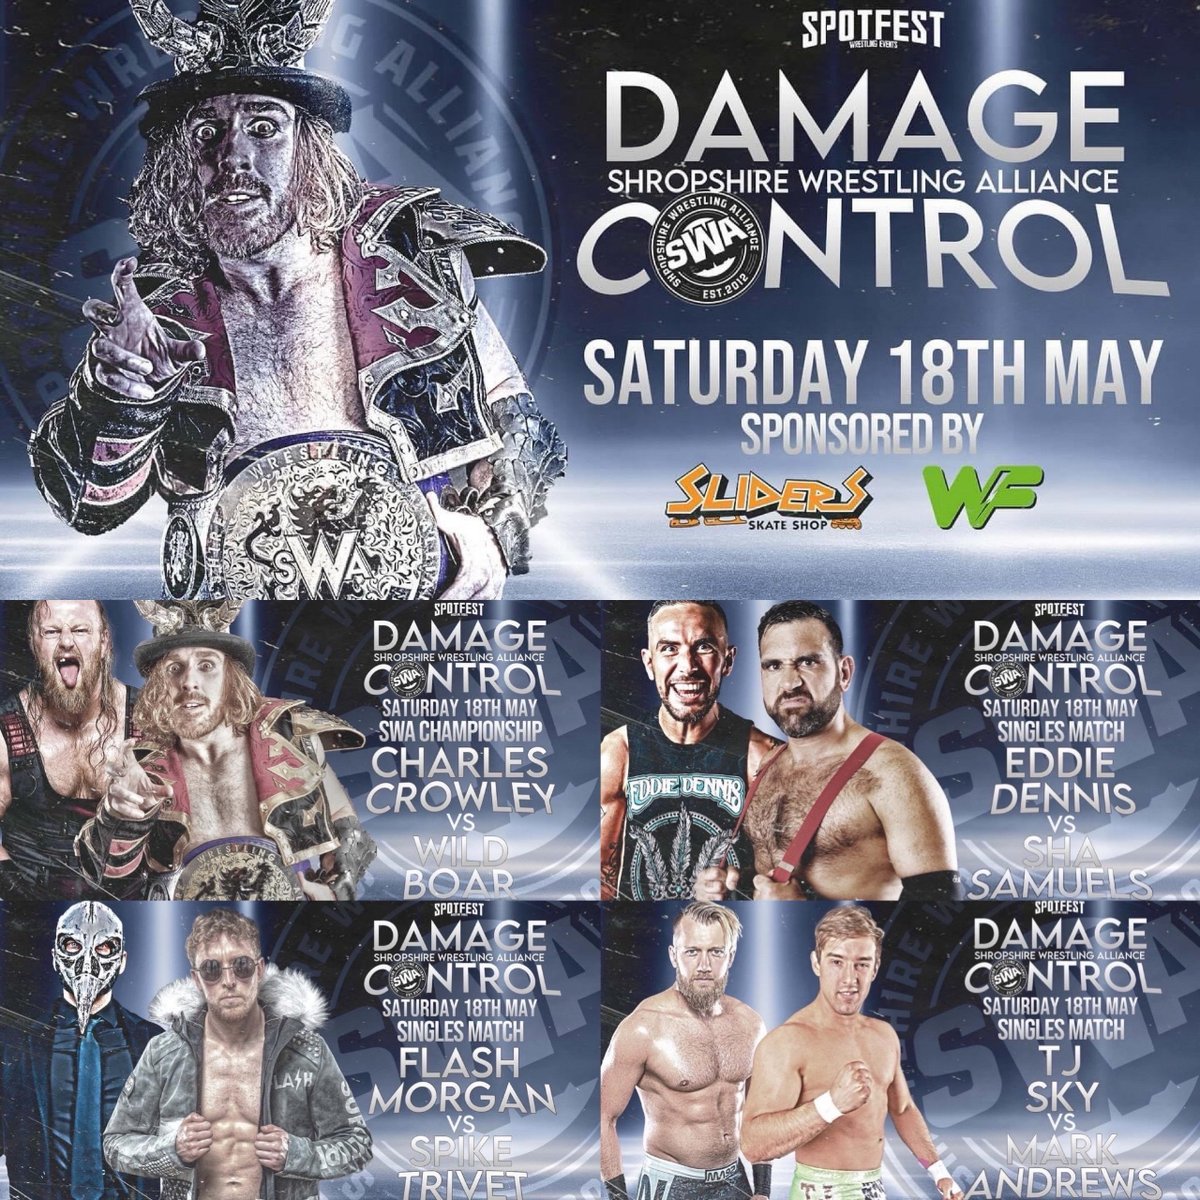 RealRasslin is at Dawley Town Hall in Telford this evening for Shropshire Wrestling Alliance’s stacked ‘Damage Control’ show. Tickets to see some of BritWres’ top talent are £12 Adults/£10 Children. Families £40 for 4. i.mtr.cool/gfqbbkmzpc #SWA #RealRasslin @ShropshireWres